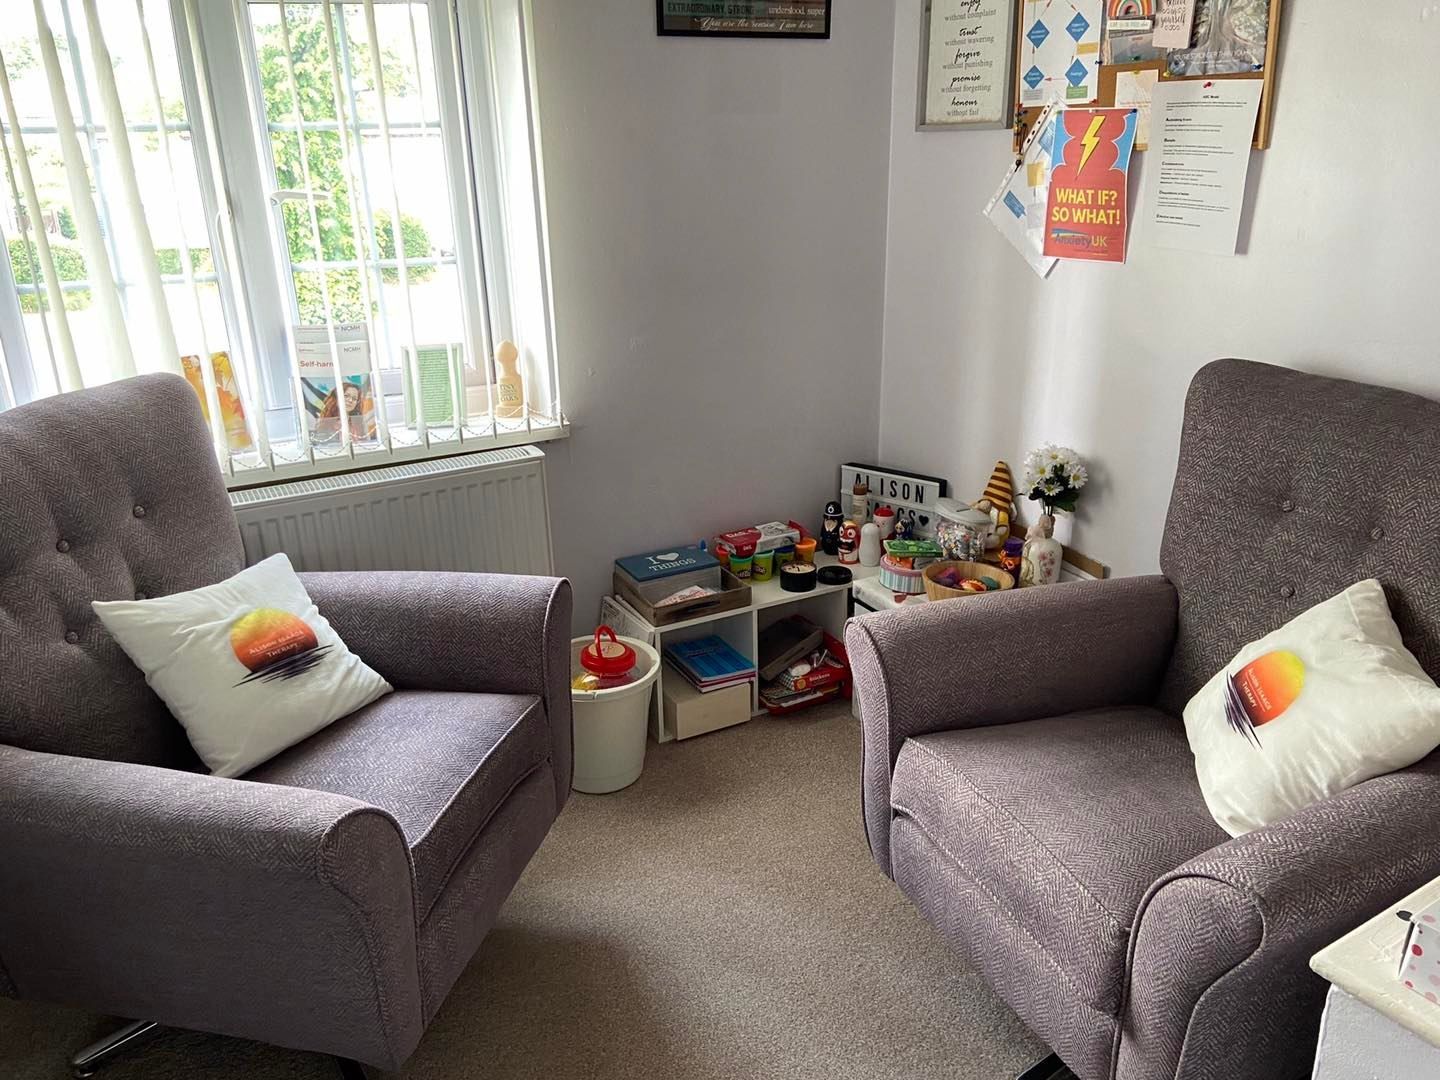 Gallery Photo of My counselling room